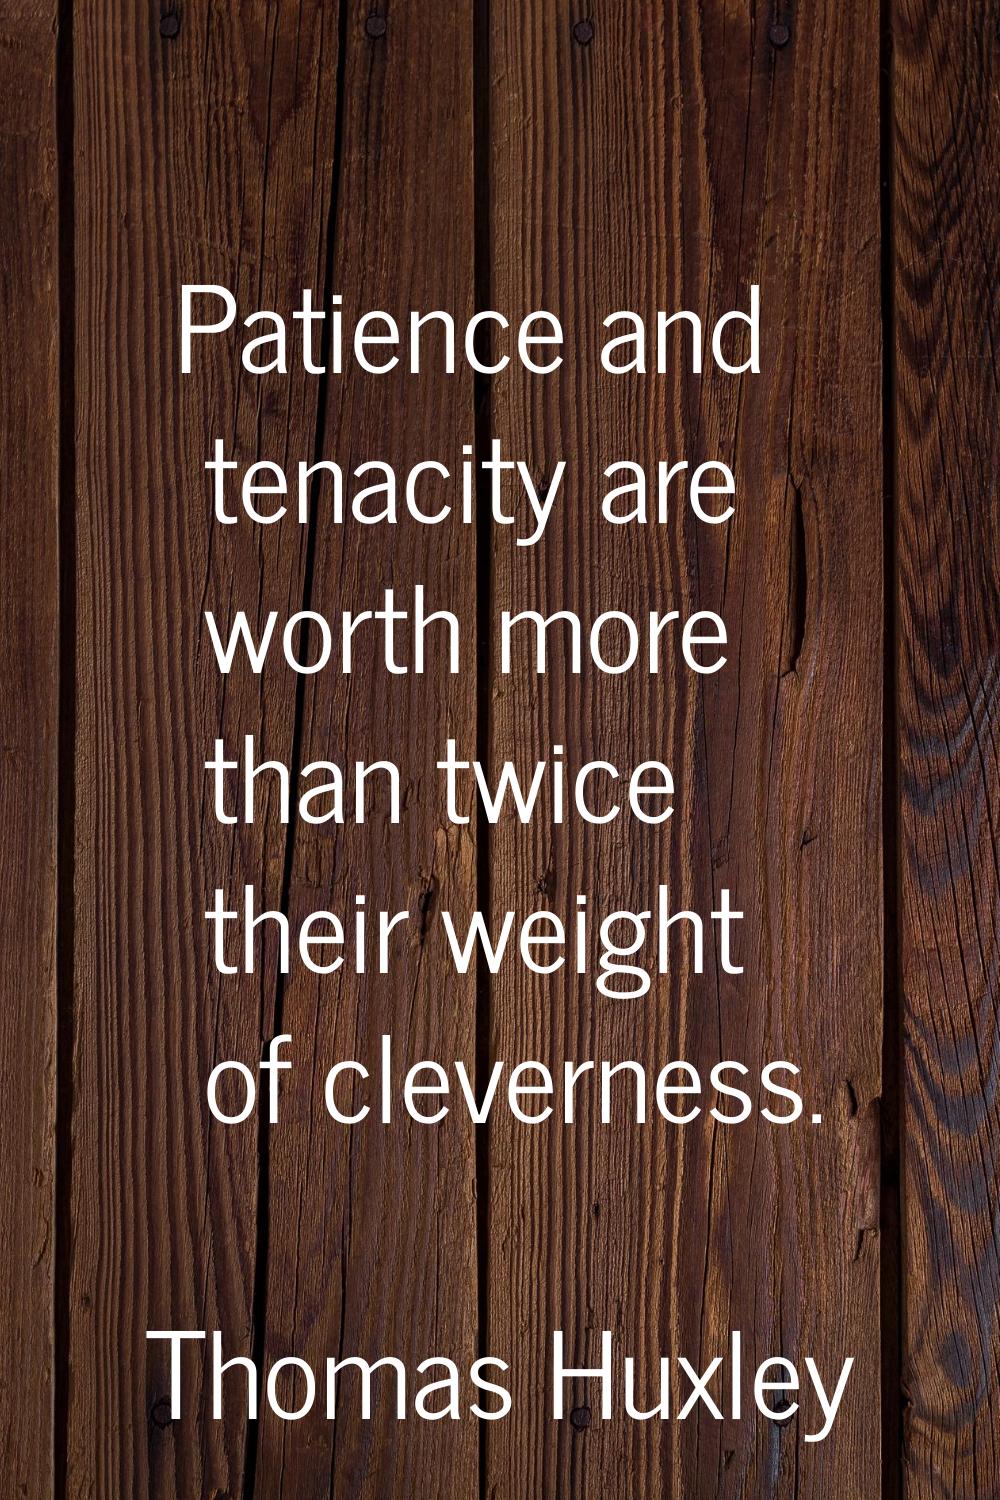 Patience and tenacity are worth more than twice their weight of cleverness.